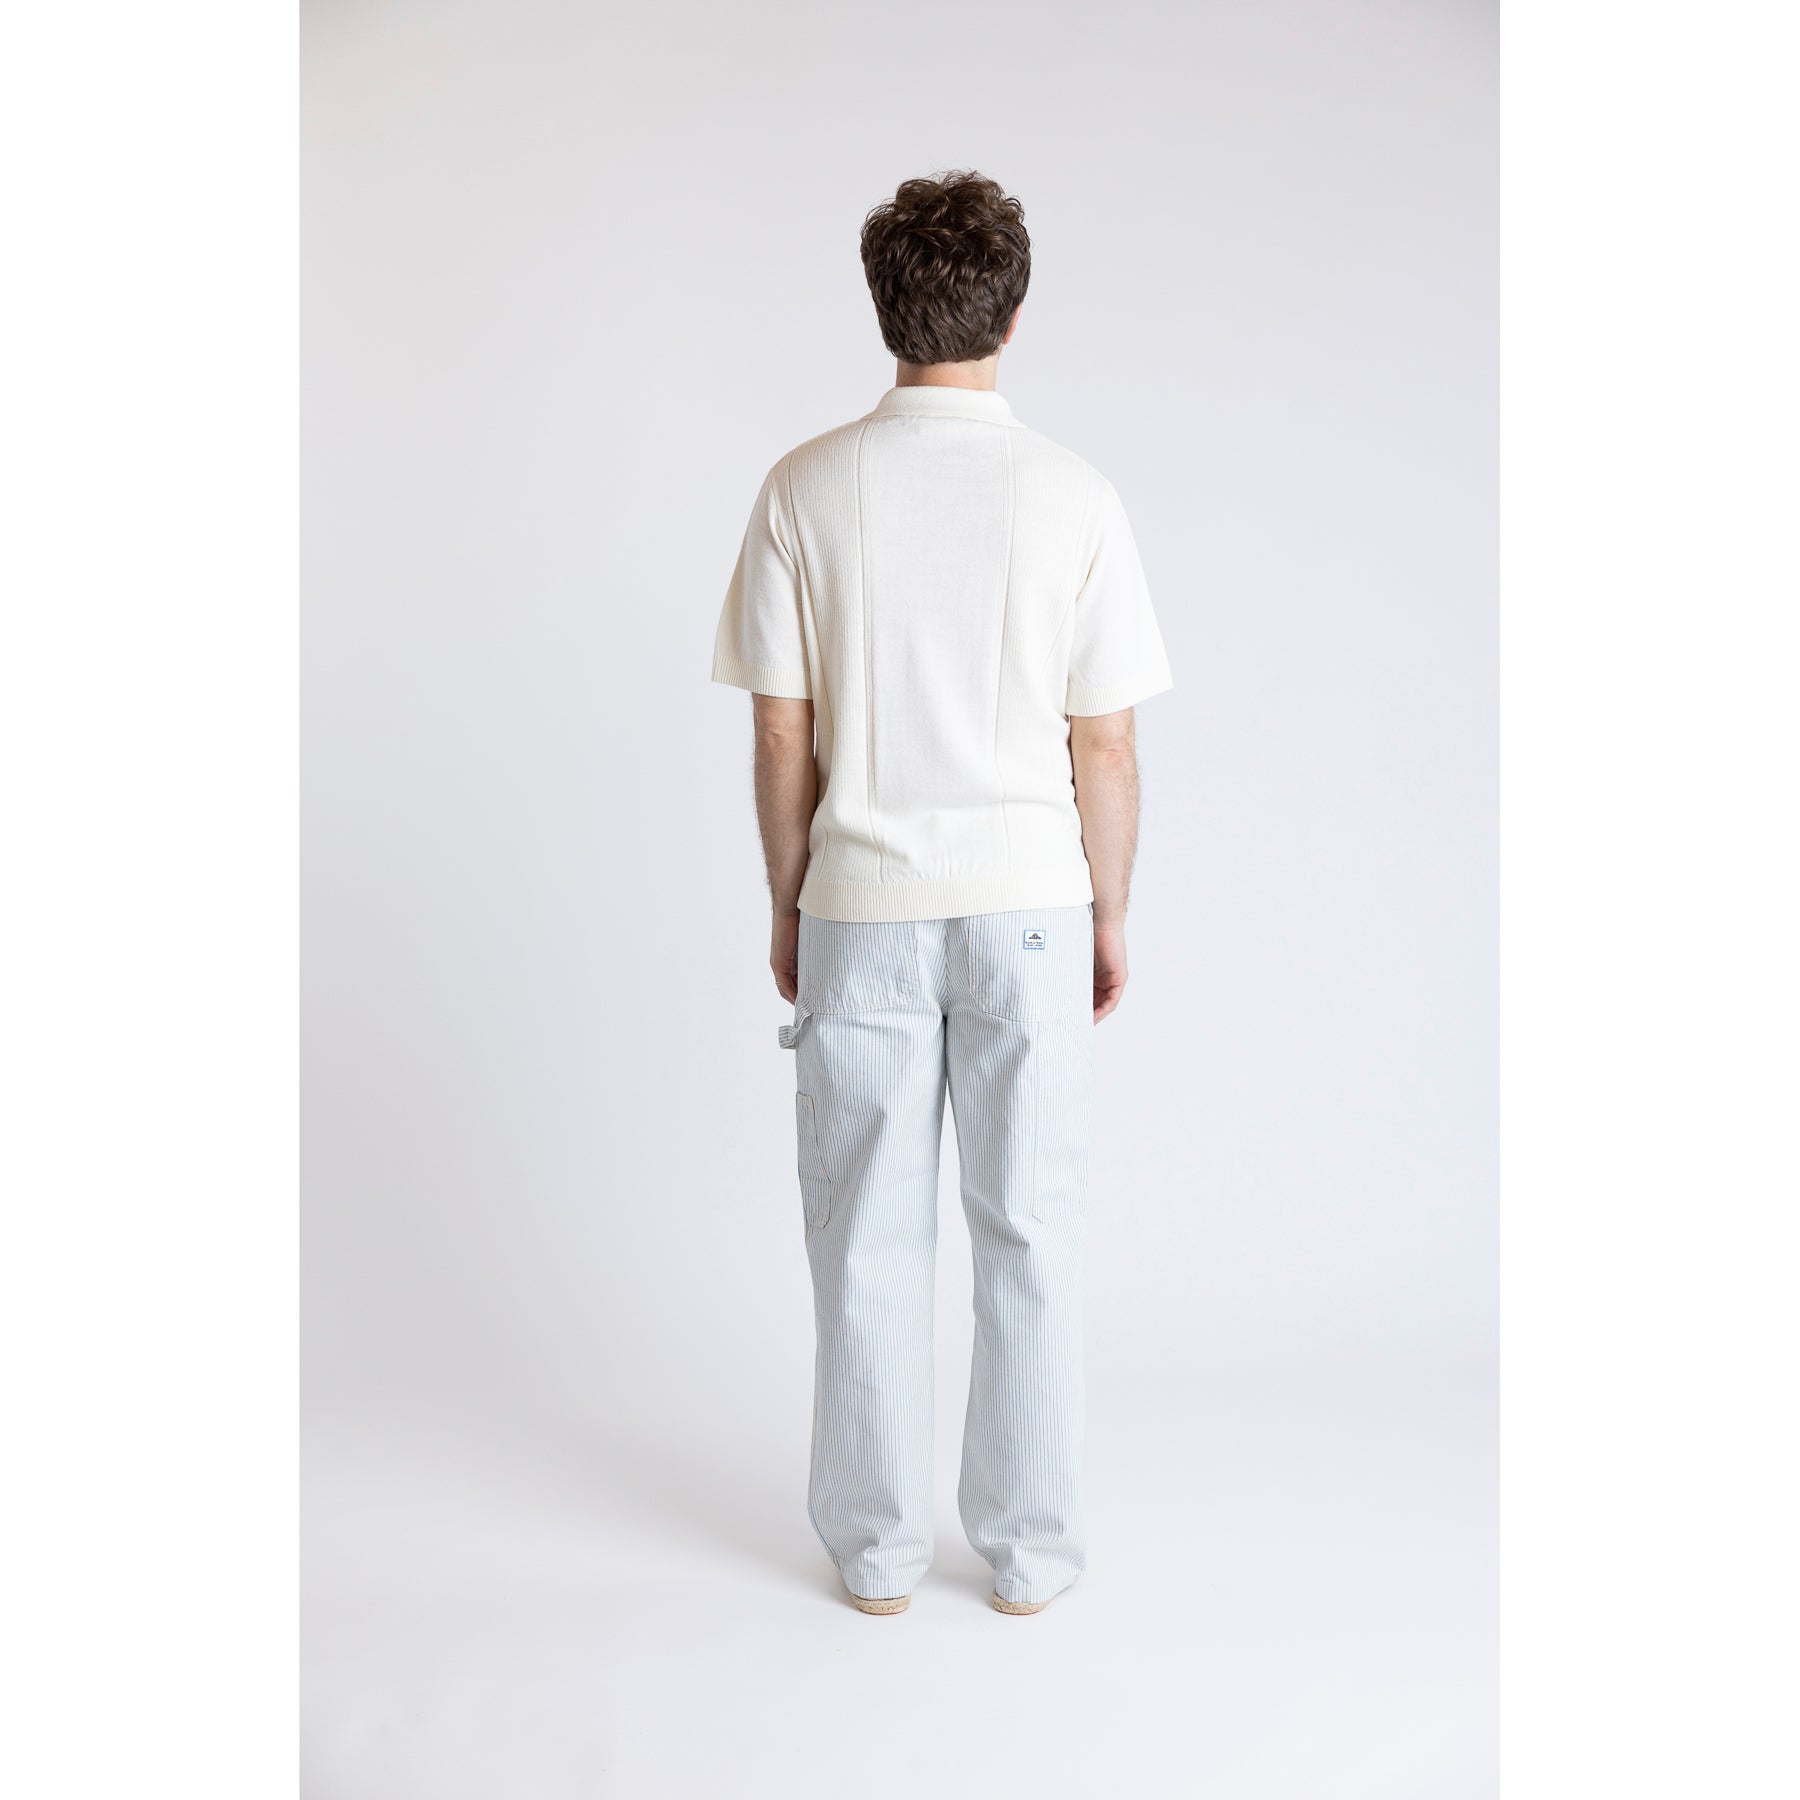 Foret Astern Short Sleeve Knit Polo Cloud